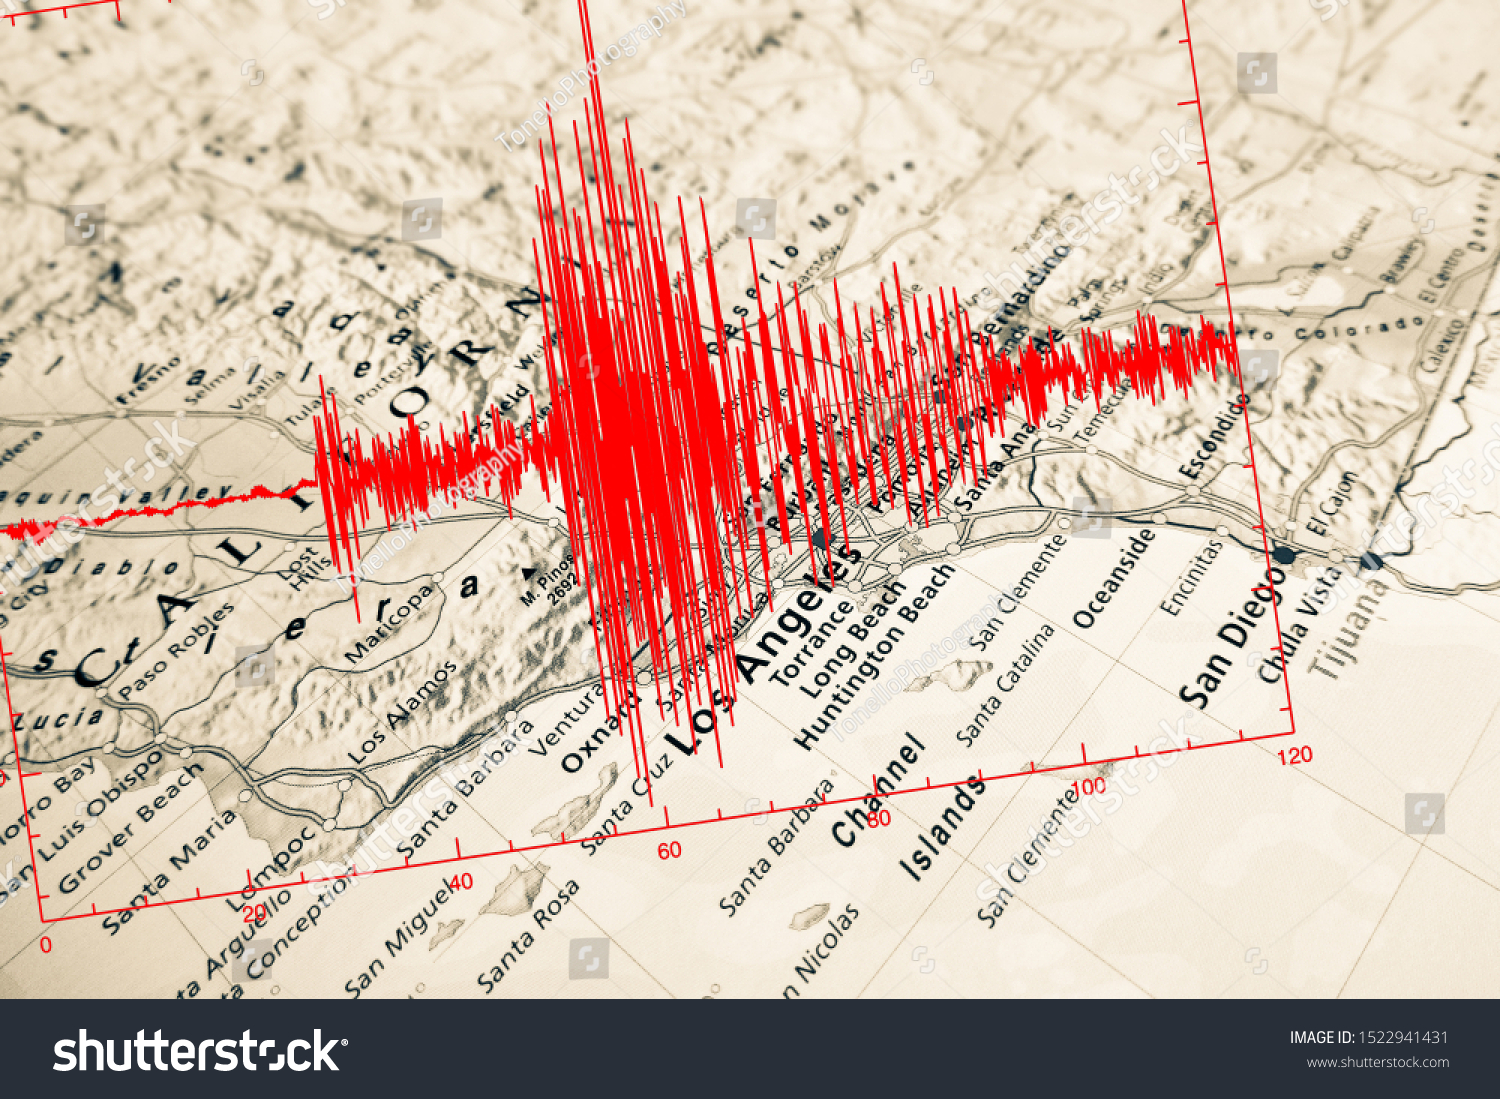 Red seismic wave over Los Angeles map #1522941431